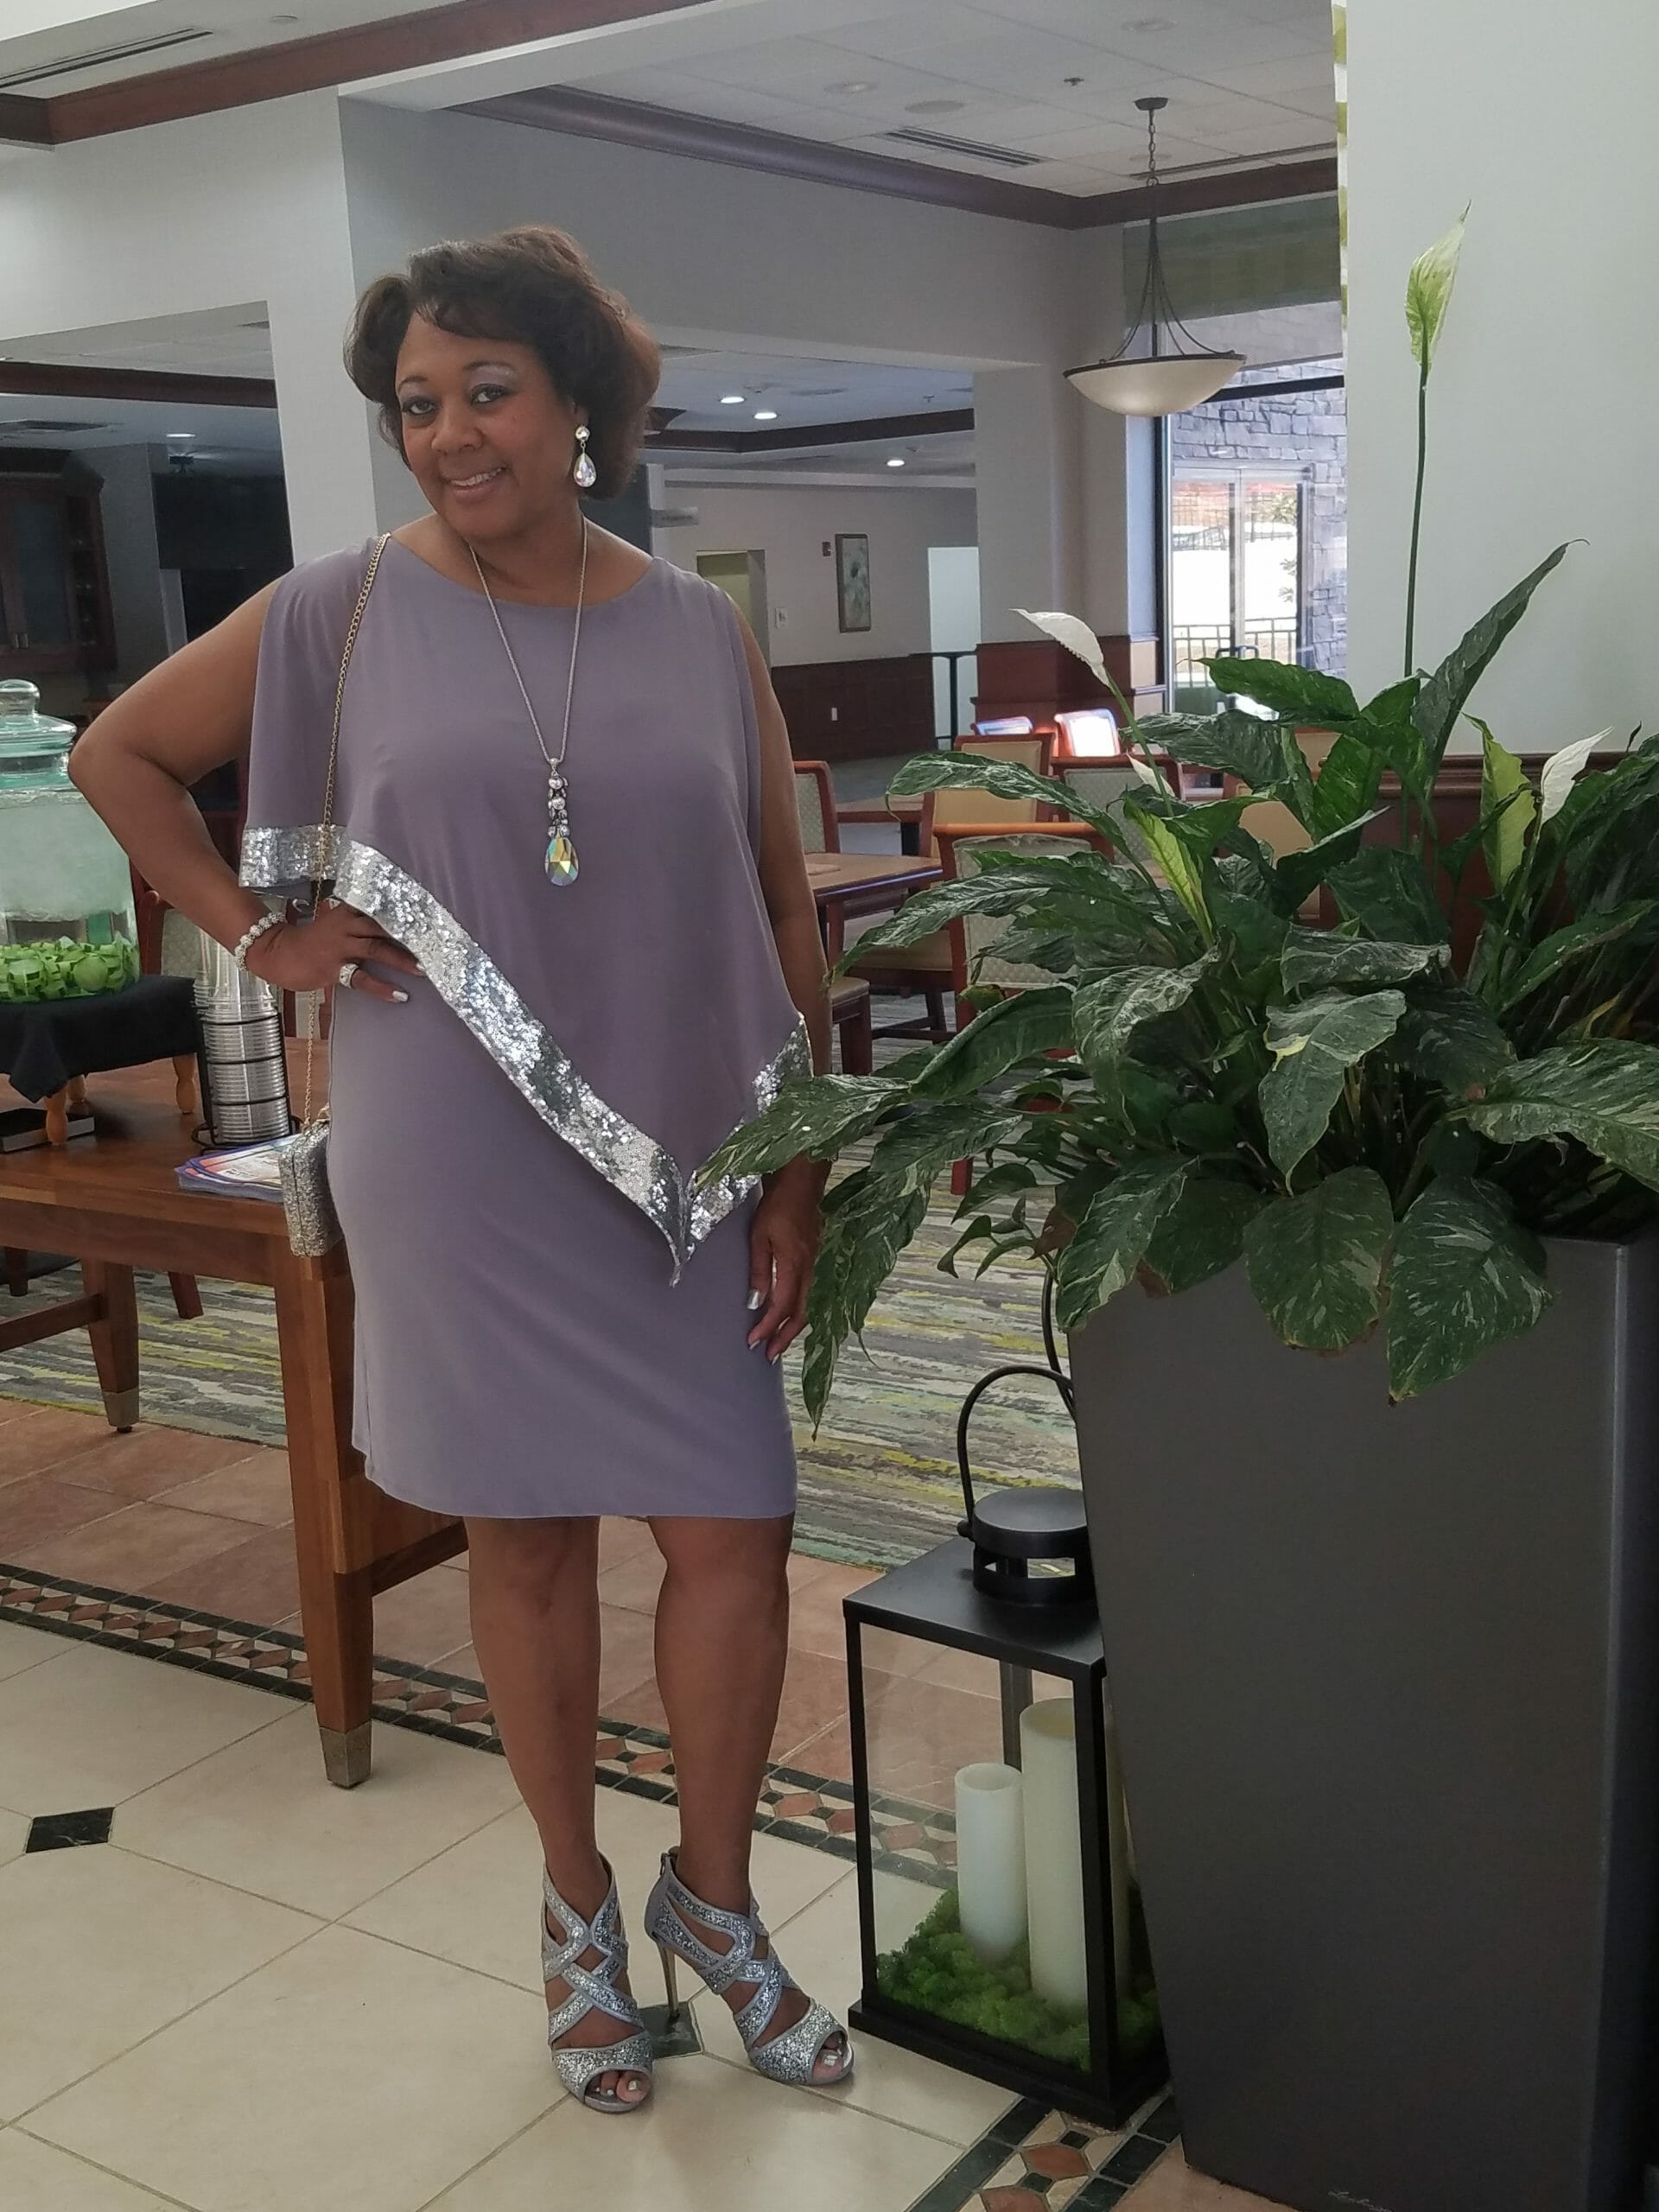 A Midnight Velvet customer at home, in a lavender dress with silver trim on the cape-like top, and silver heeled sandals.